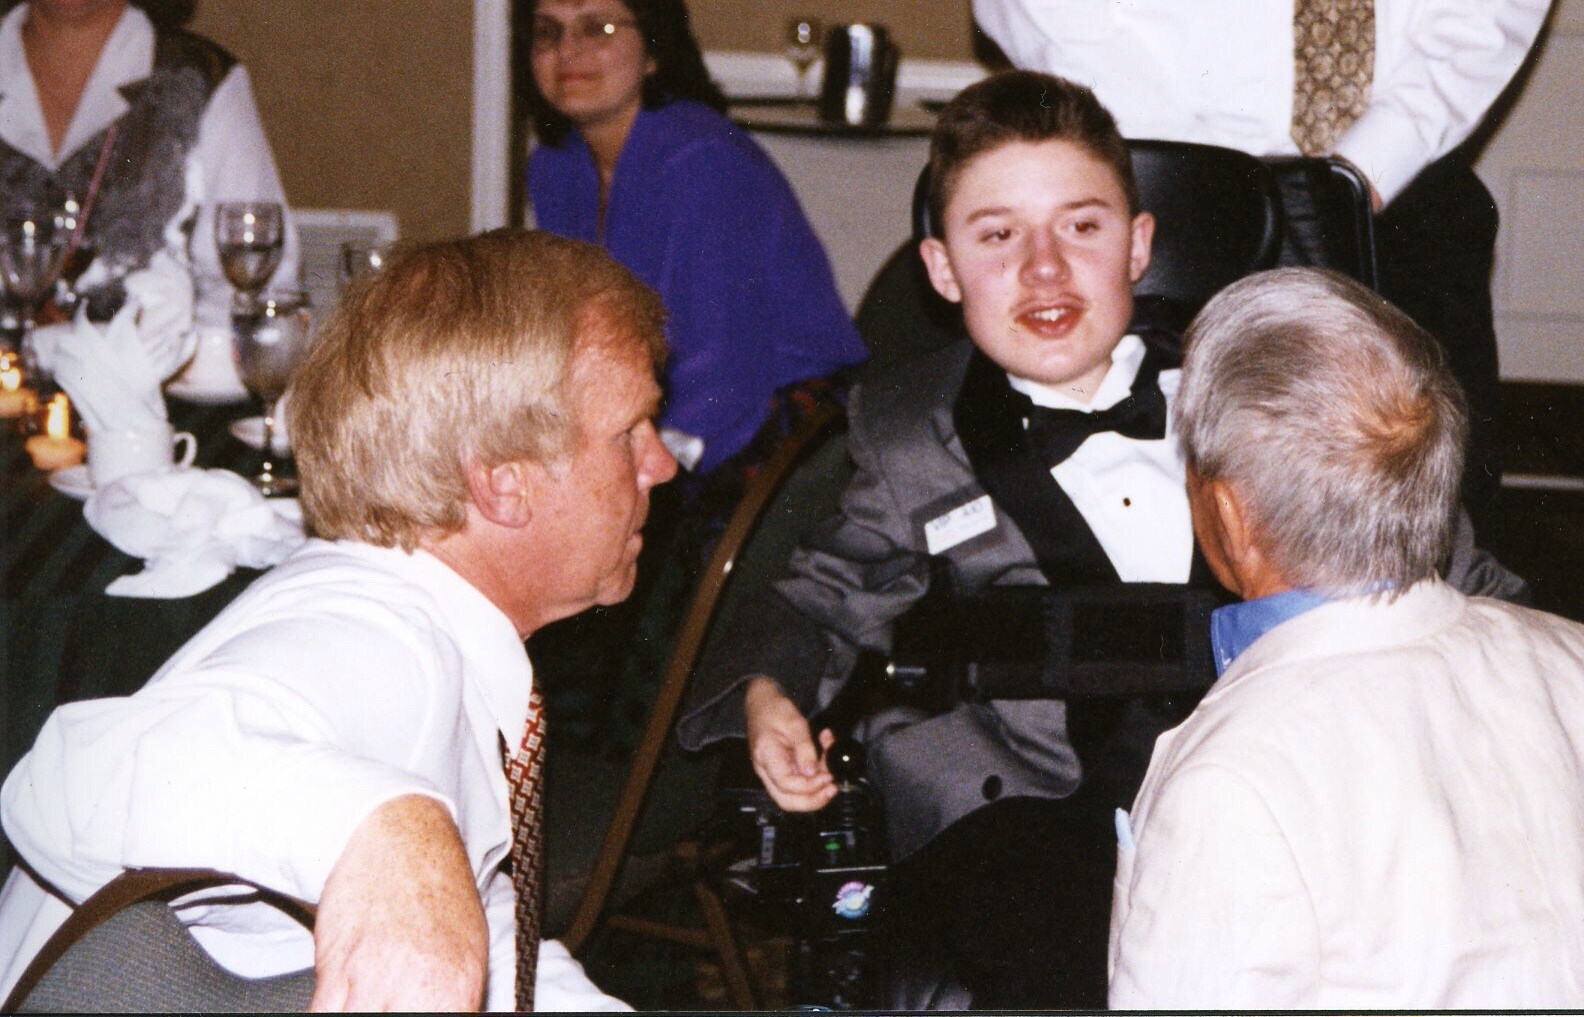 Ben with Jeremy Bulloch (left), Artoo, and Kenny Baker (right), Men Behind the Mask Dinner, 1997 Hackensack <i>Star Wars</i> convention.